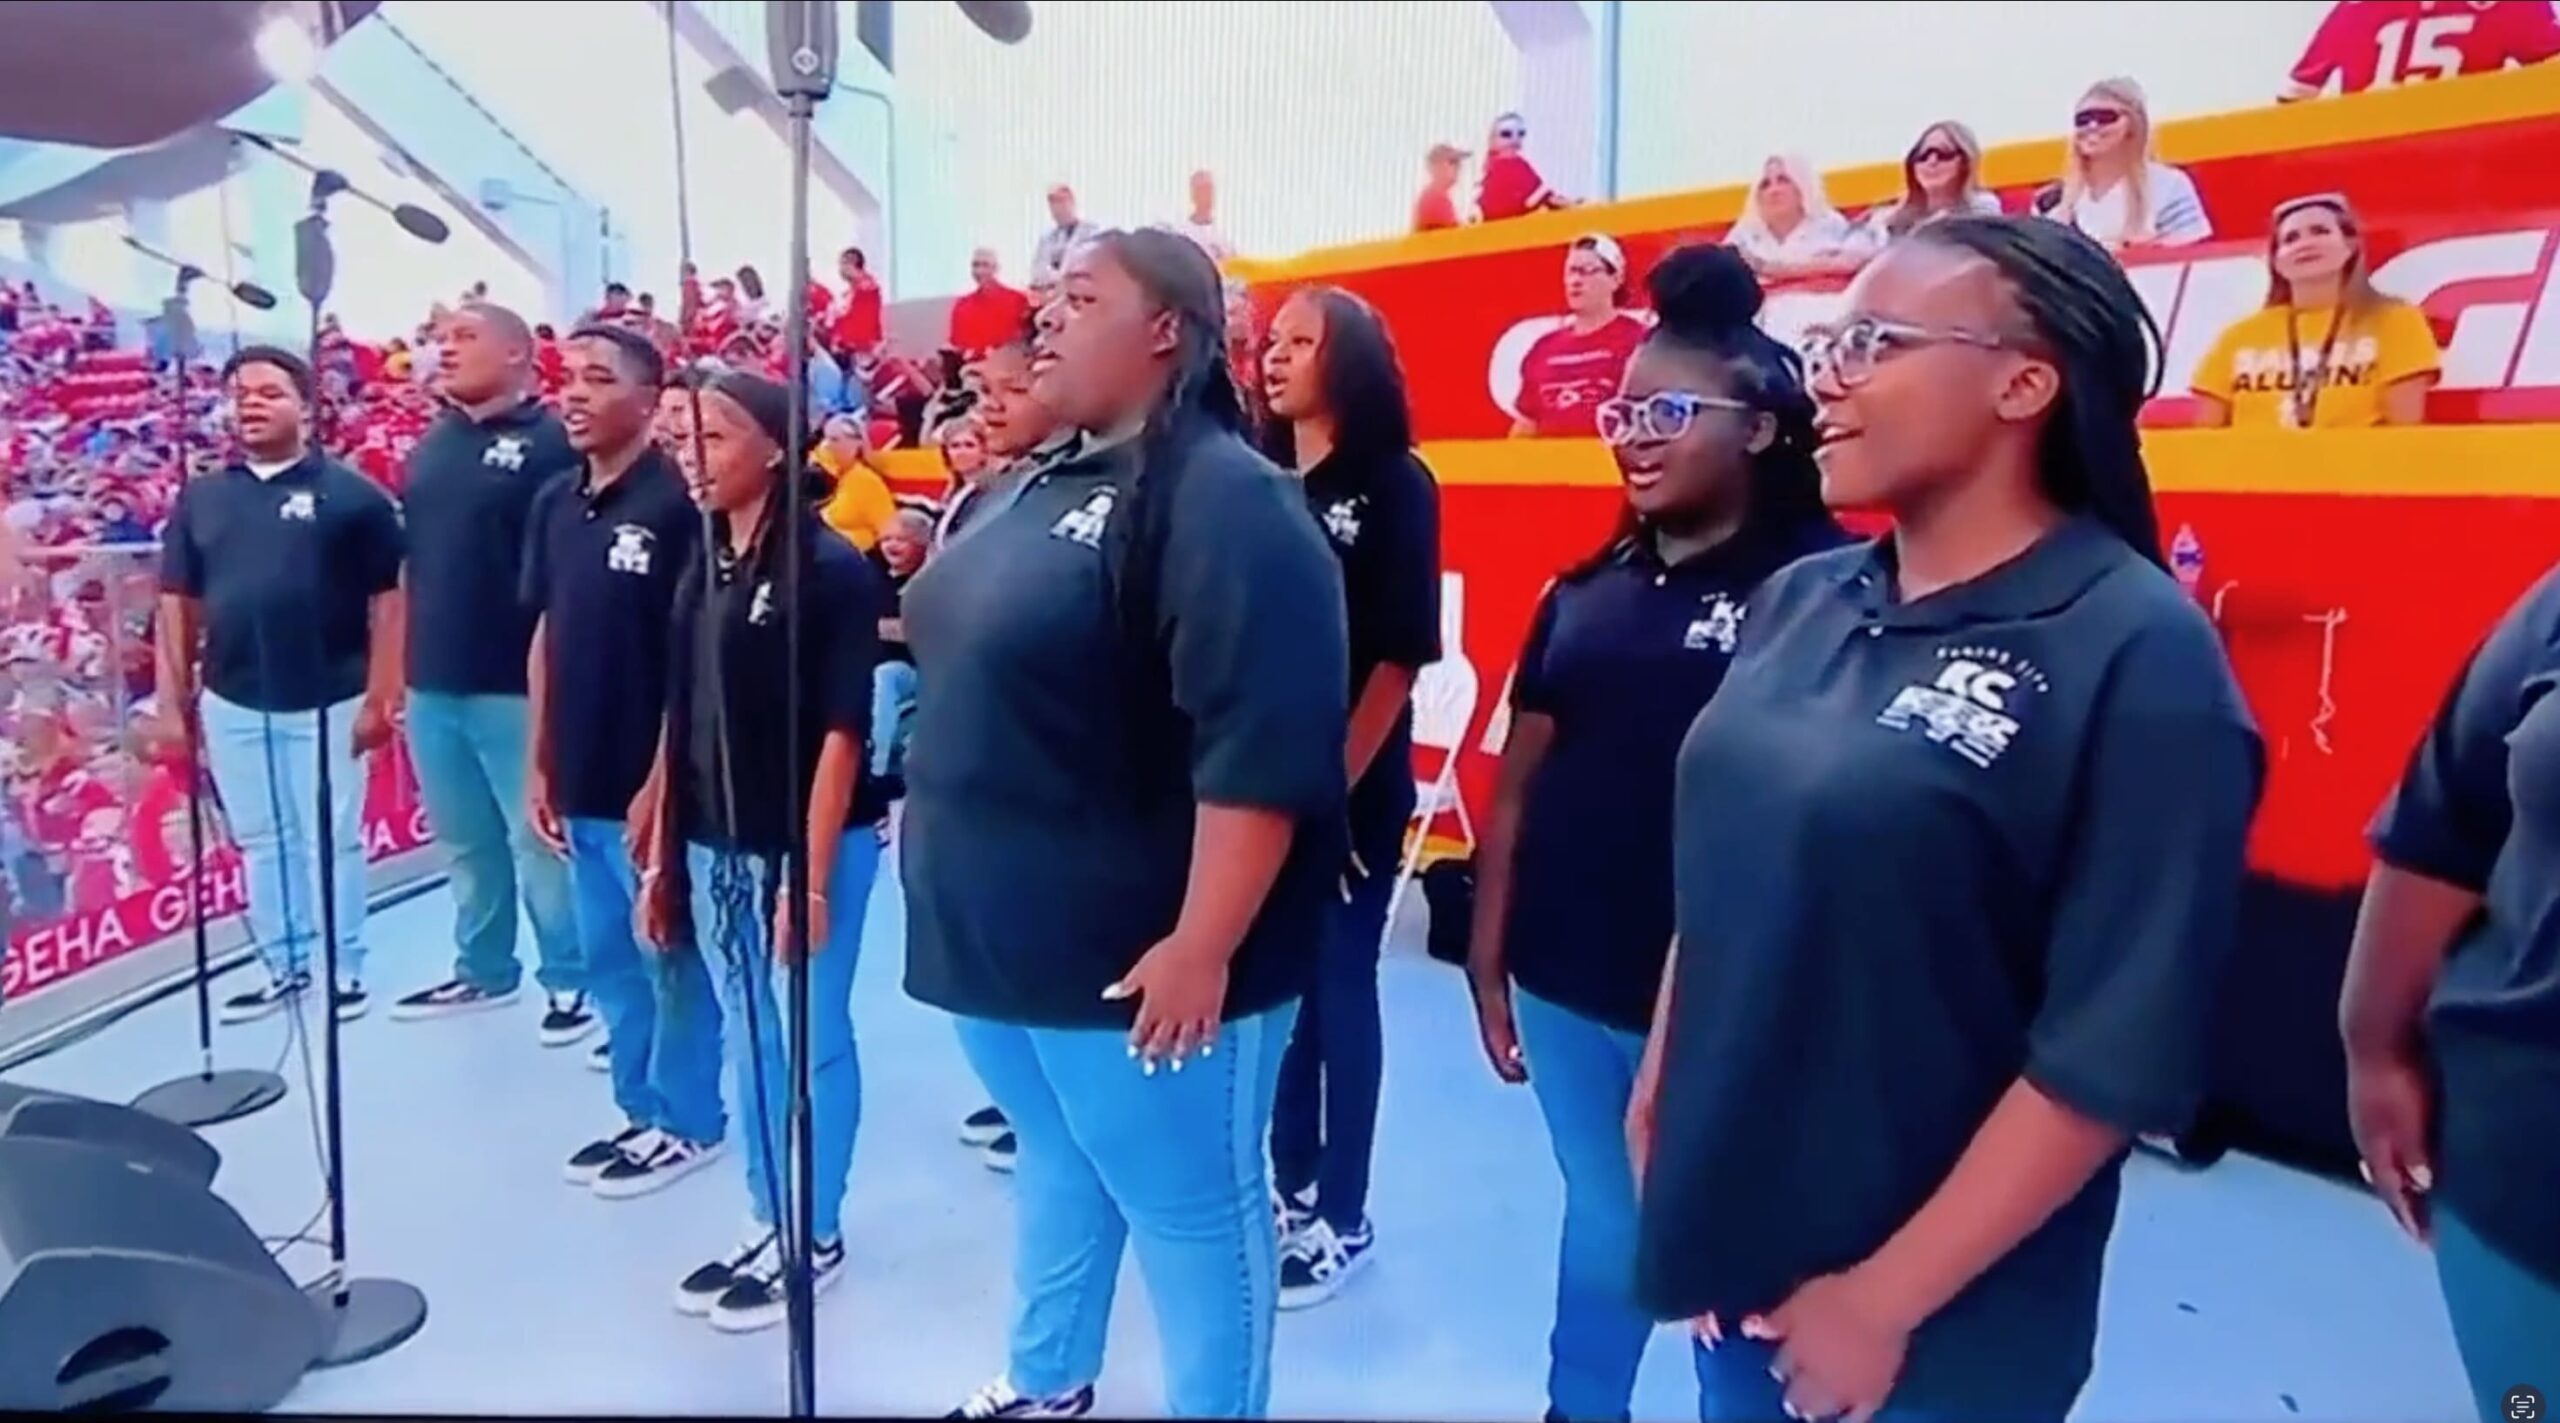 WATCH: Kansas City Chiefs Fans Rain Down Boos After the NFL Plays the “Black National Anthem” BEFORE the Real National Anthem